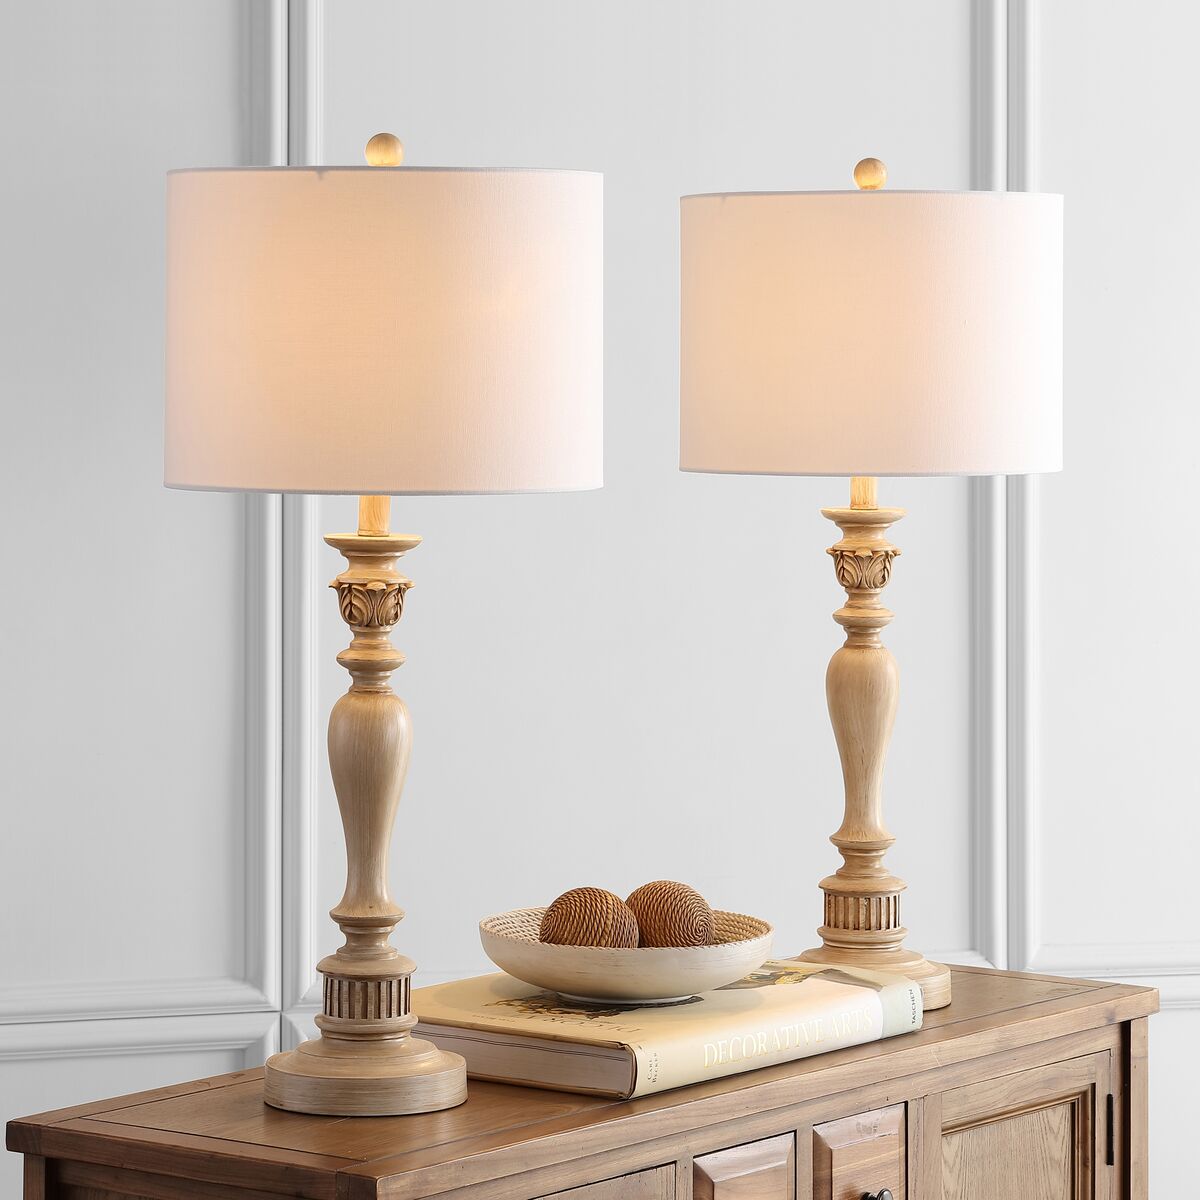 Find the Harriett Candlestick Lamps here.
